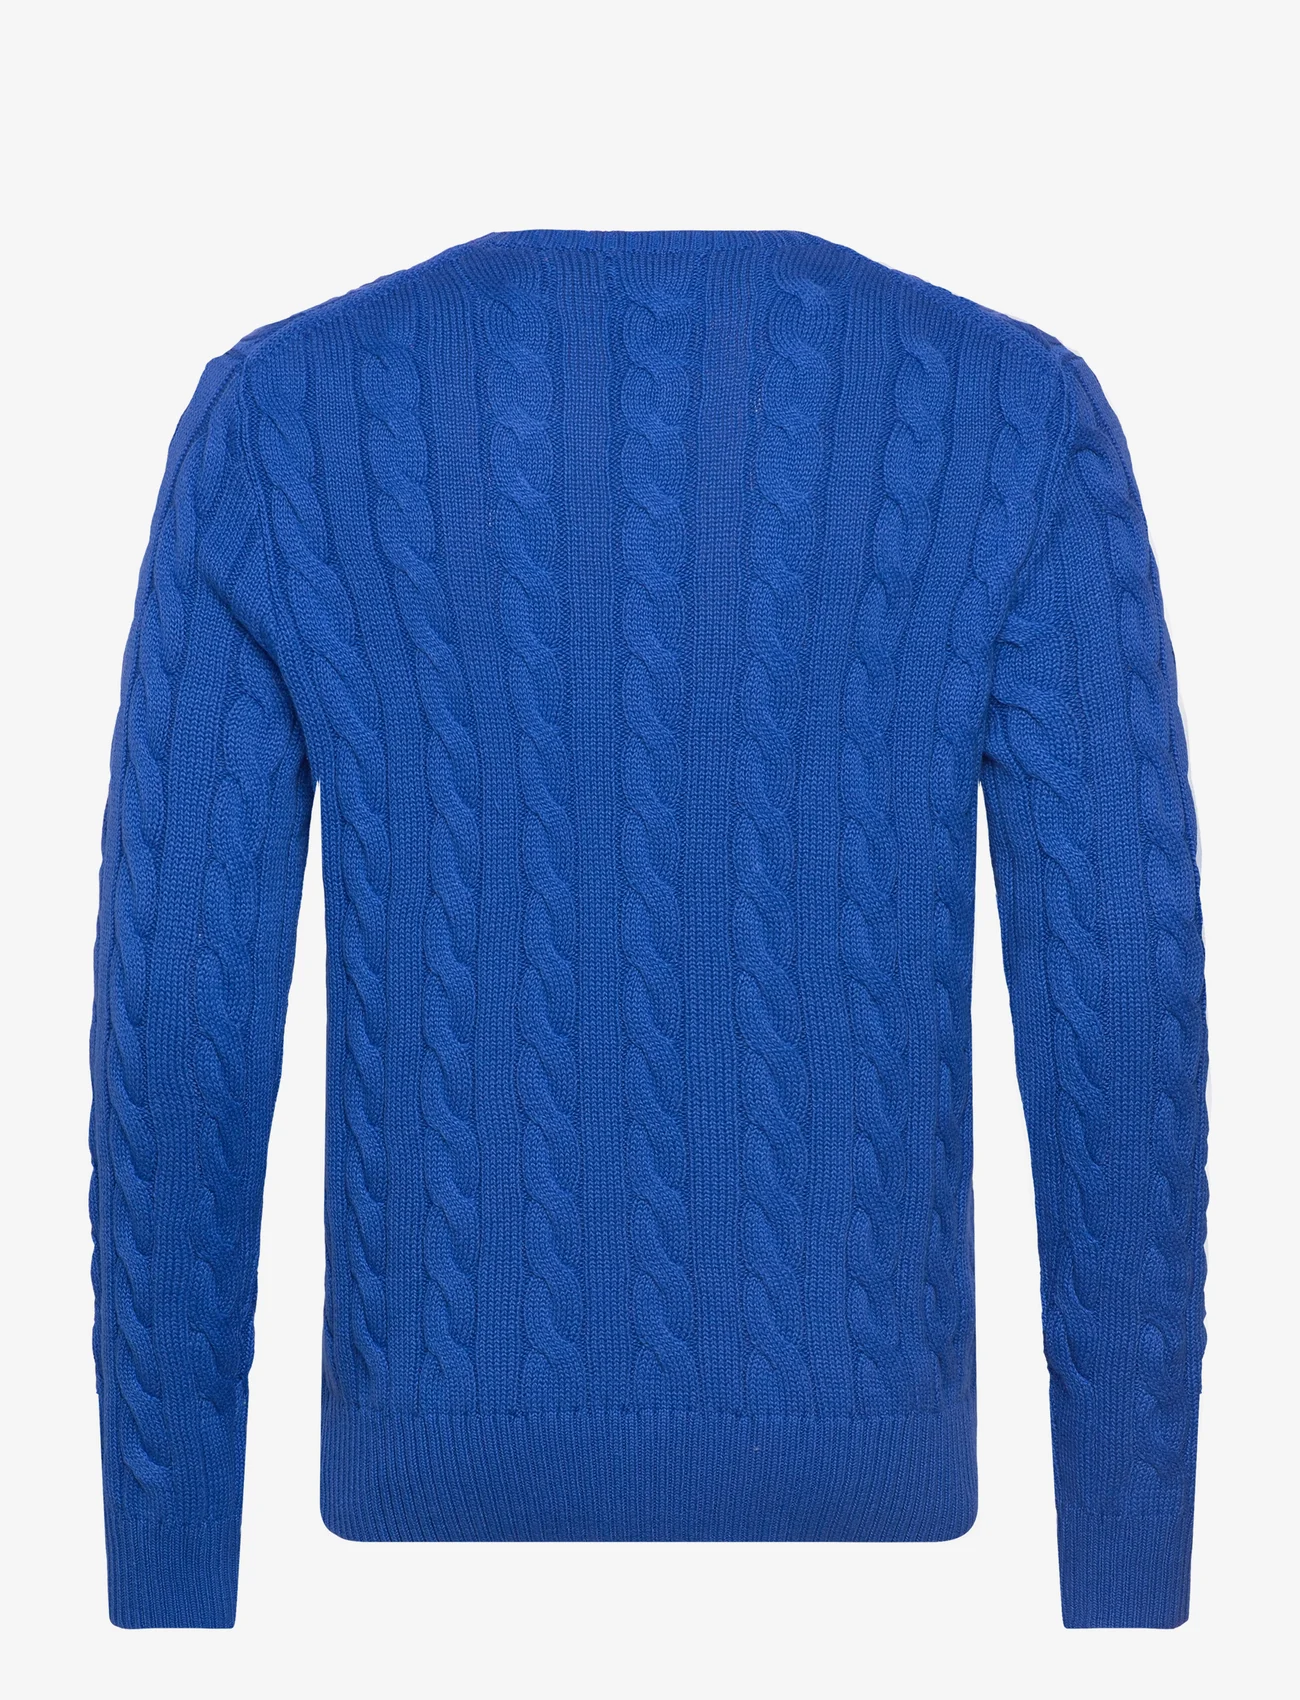 Polo Ralph Lauren - Cable-Knit Cotton Sweater - rund hals - heritage blue - 1